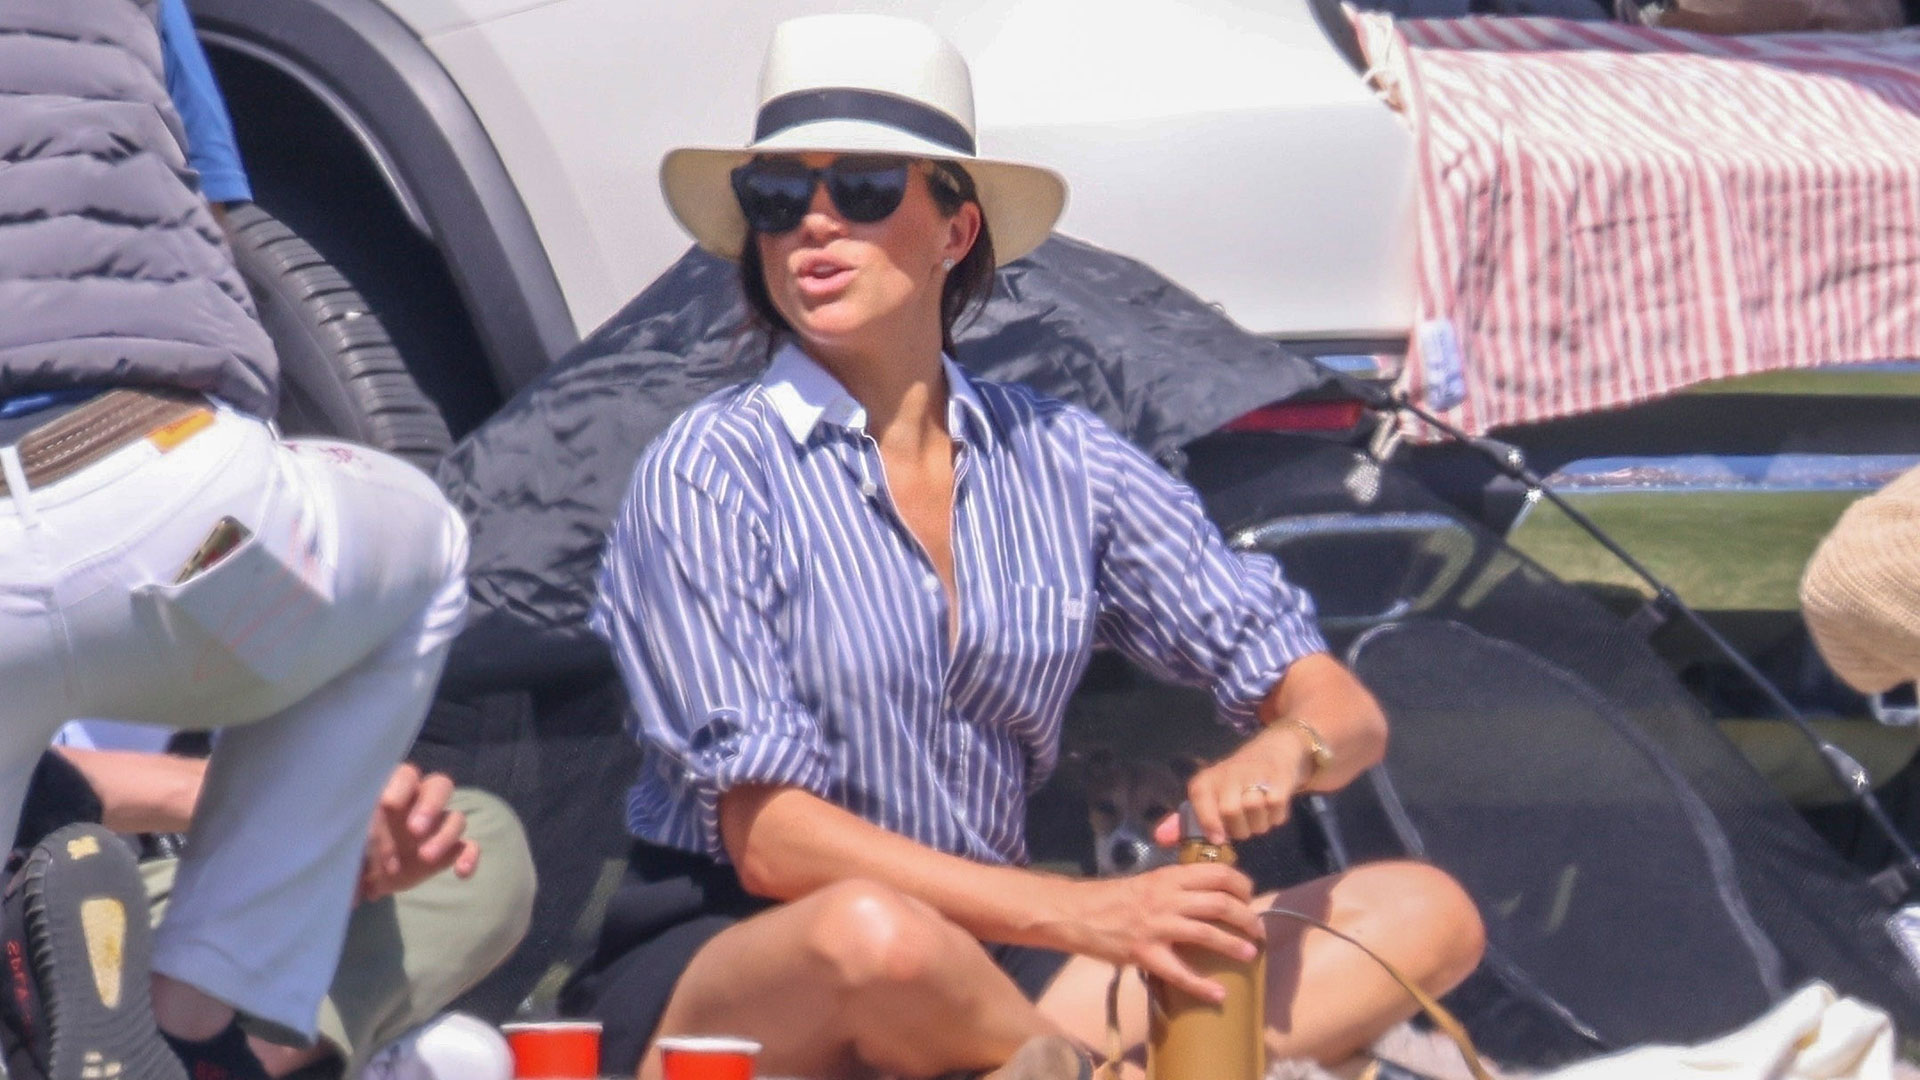 Meghan Markle was at the annual tournament "Harry East Memorial"which took place in California last weekend (The Grosby Group)